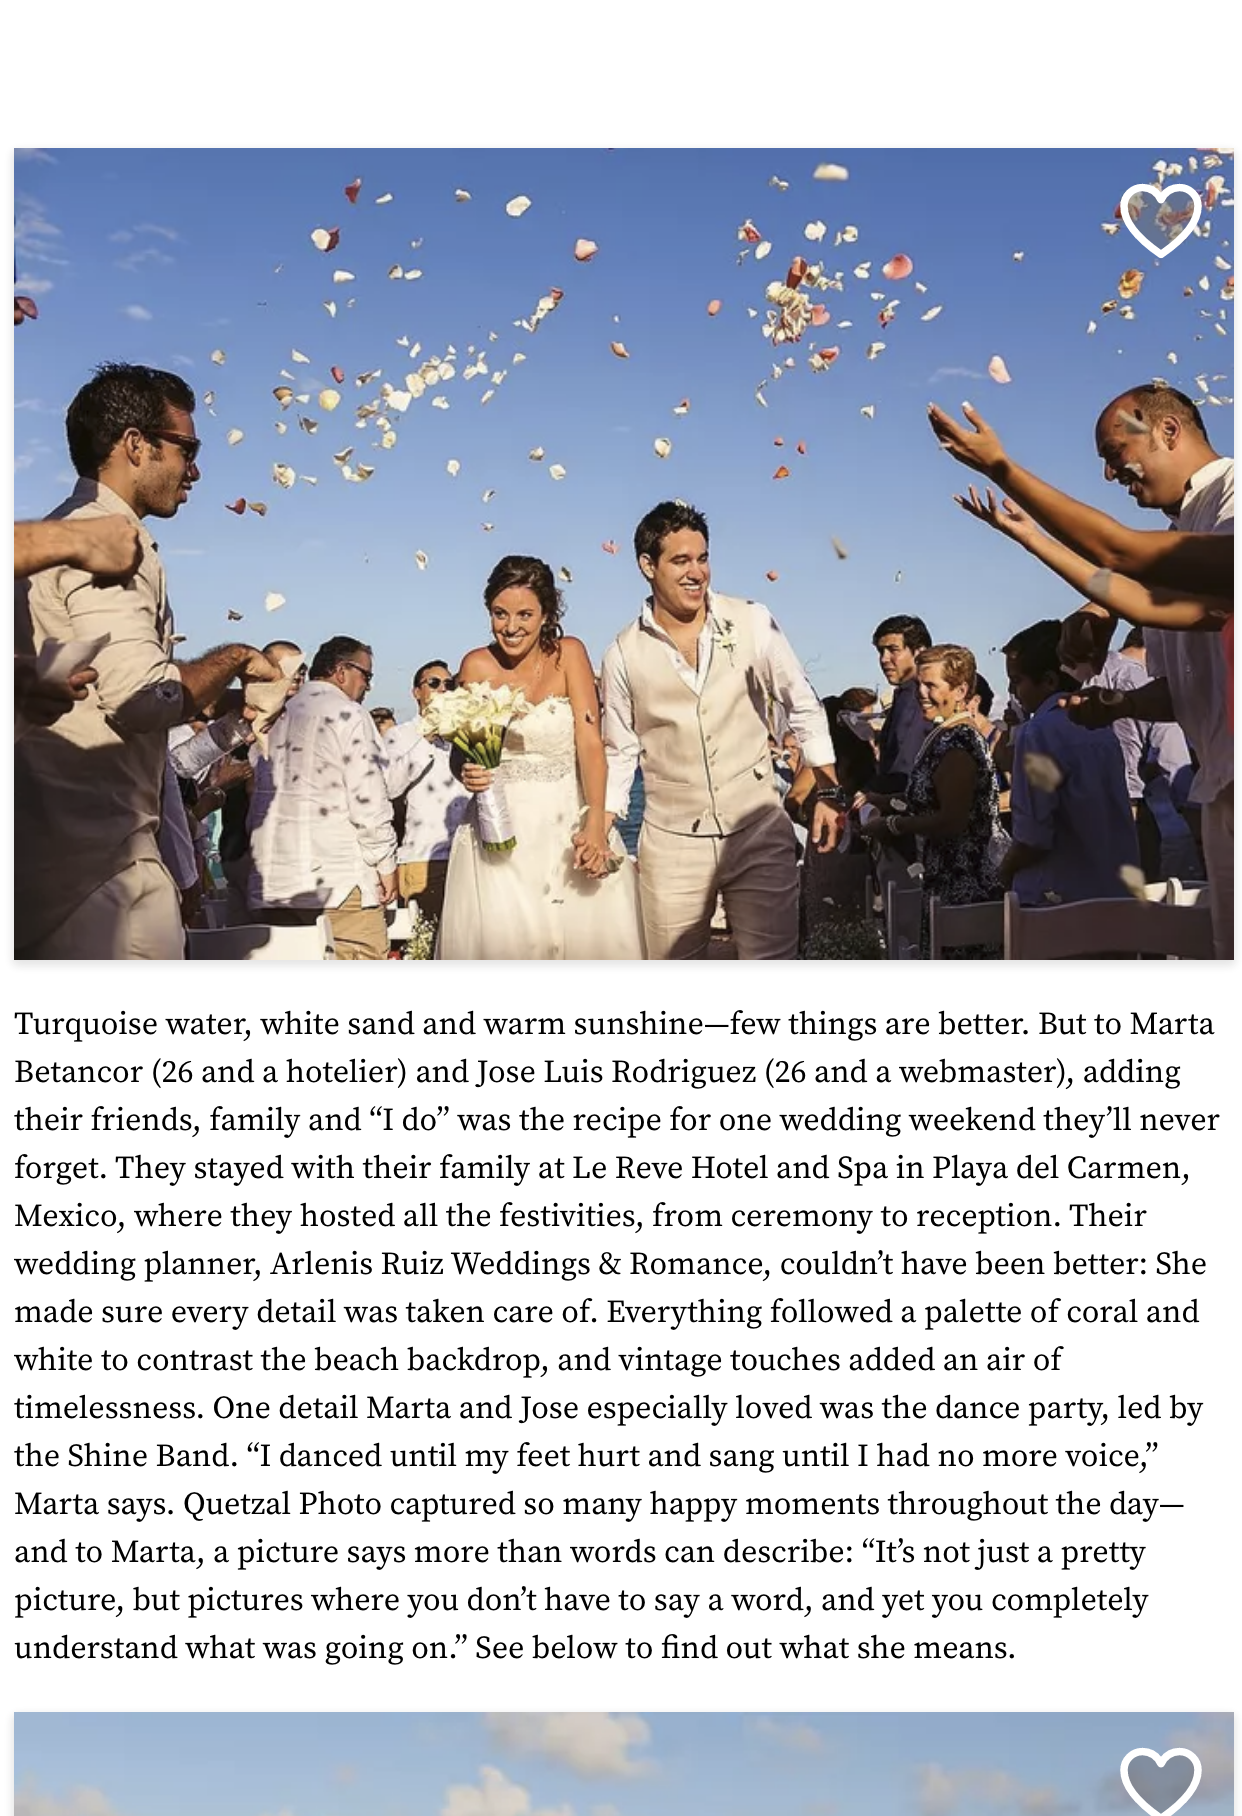 A Romantic Beach Wedding at Le Reve Hotel and Spa in Playa del Carmen, Mexico